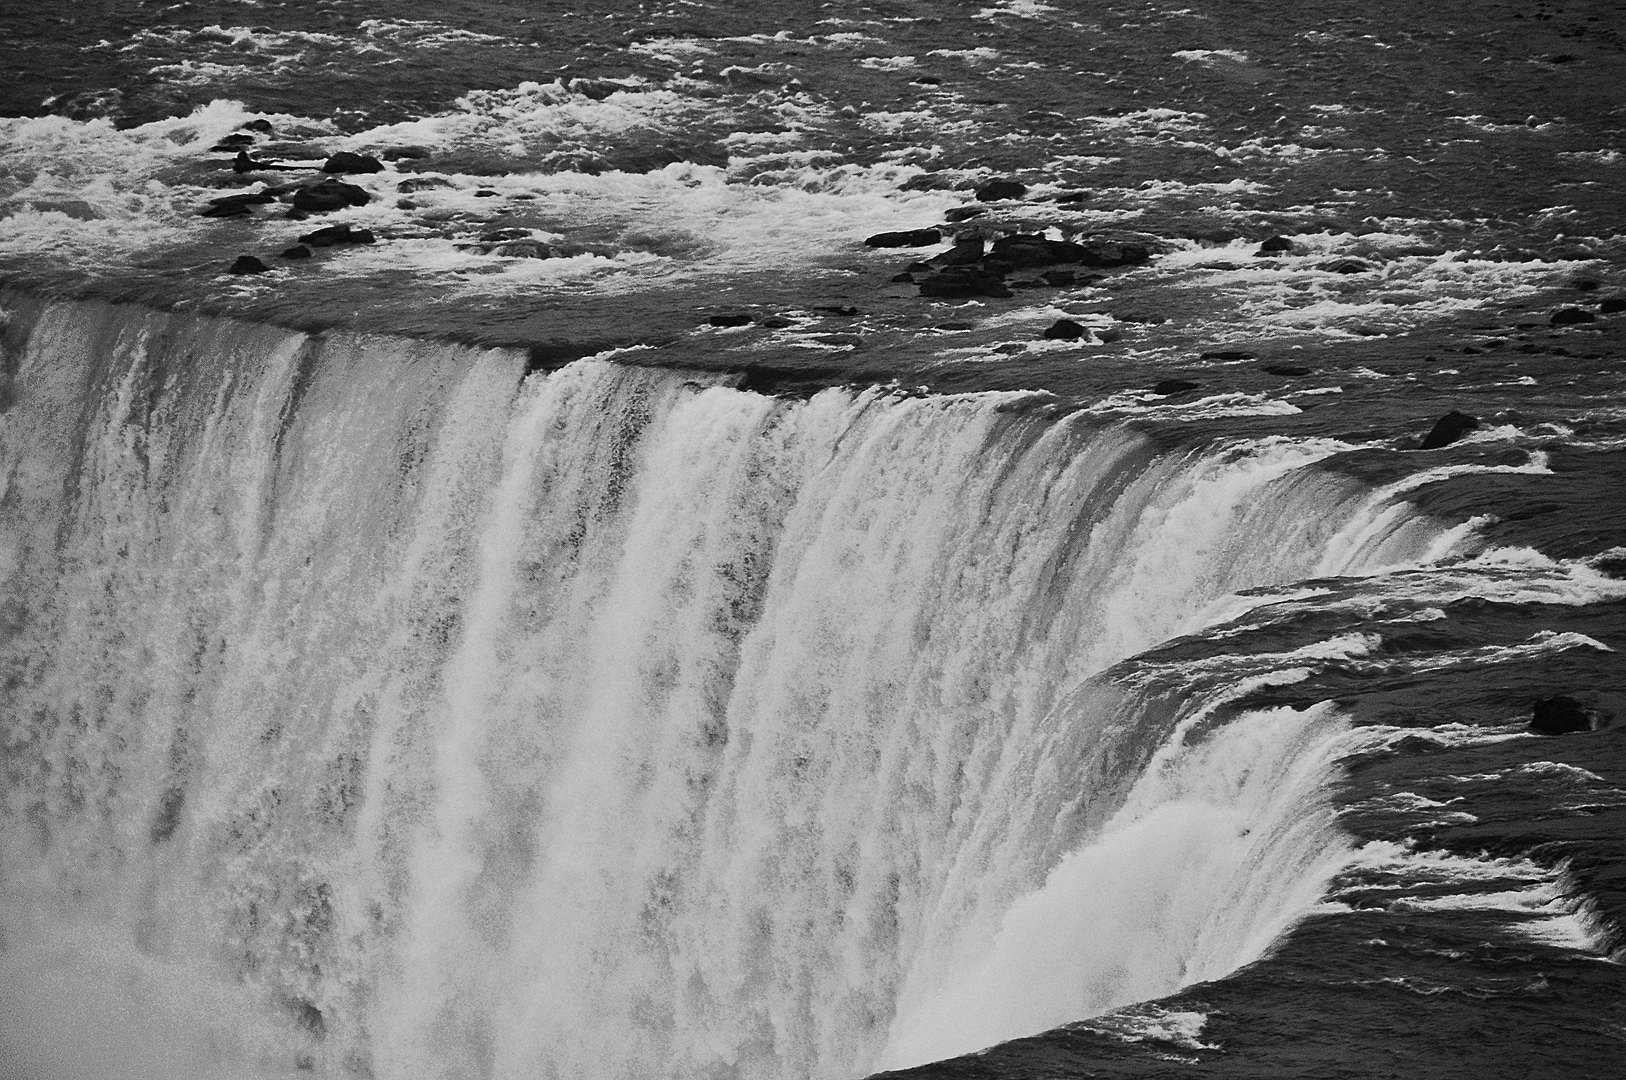 Niagara Falls The Power of Water in Black and White